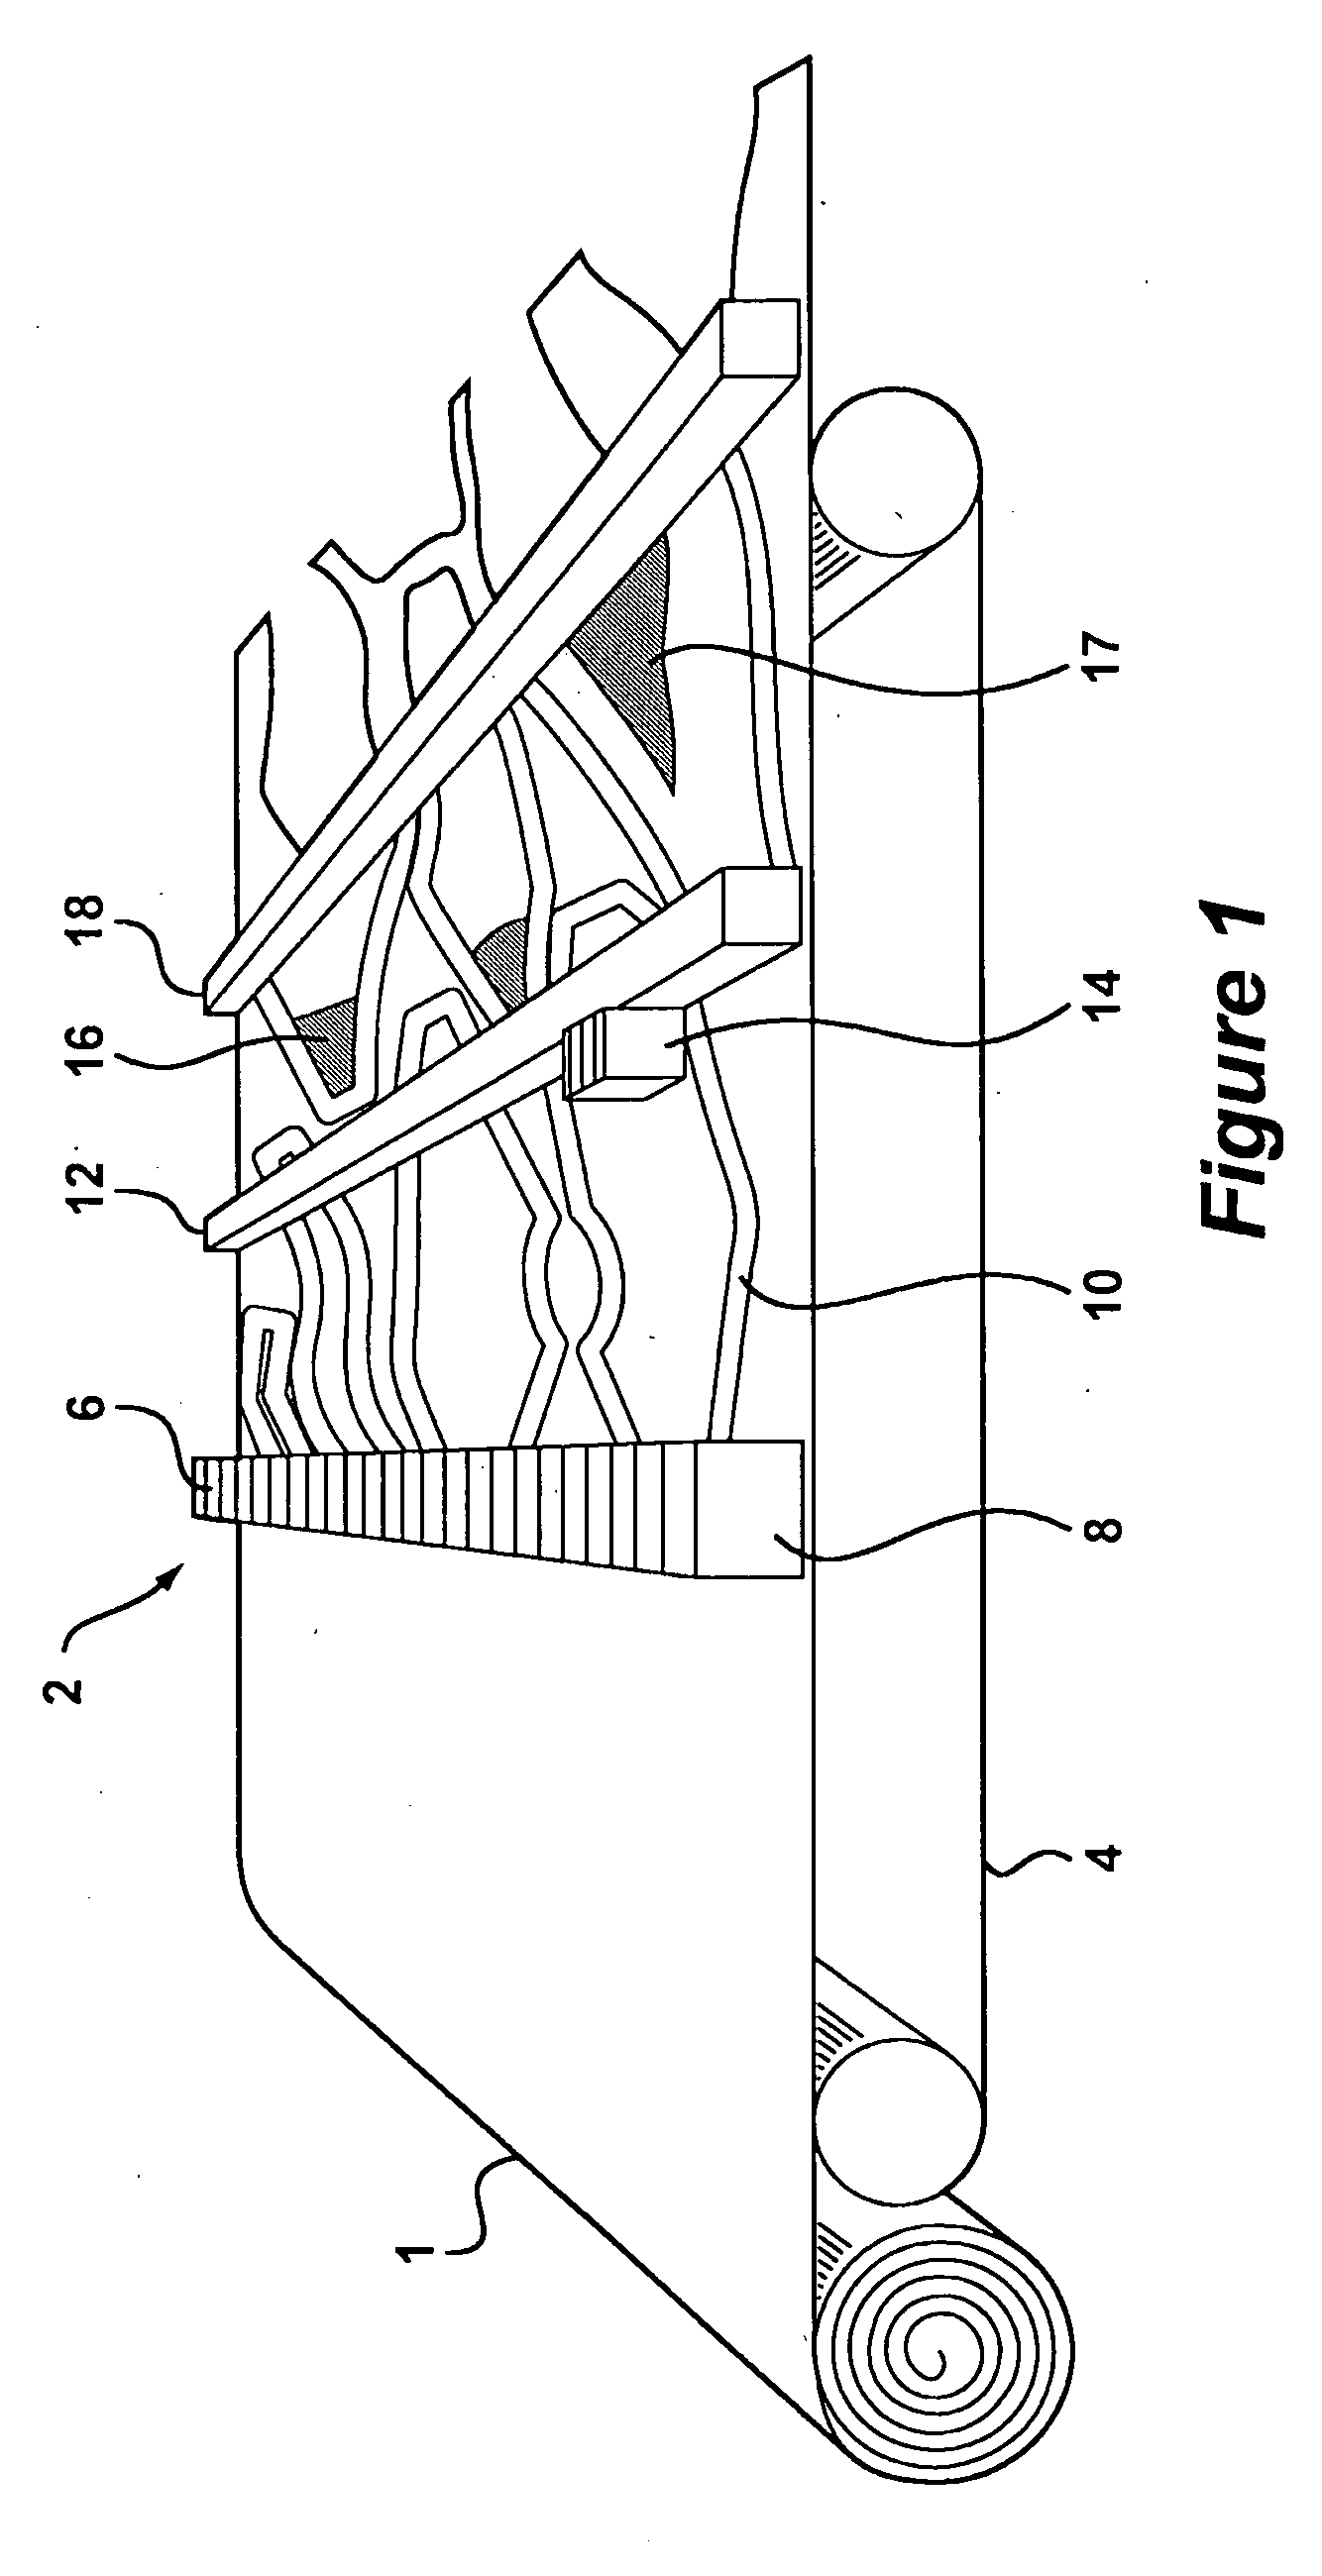 Method for Providing a Localised Finish on Textile Article